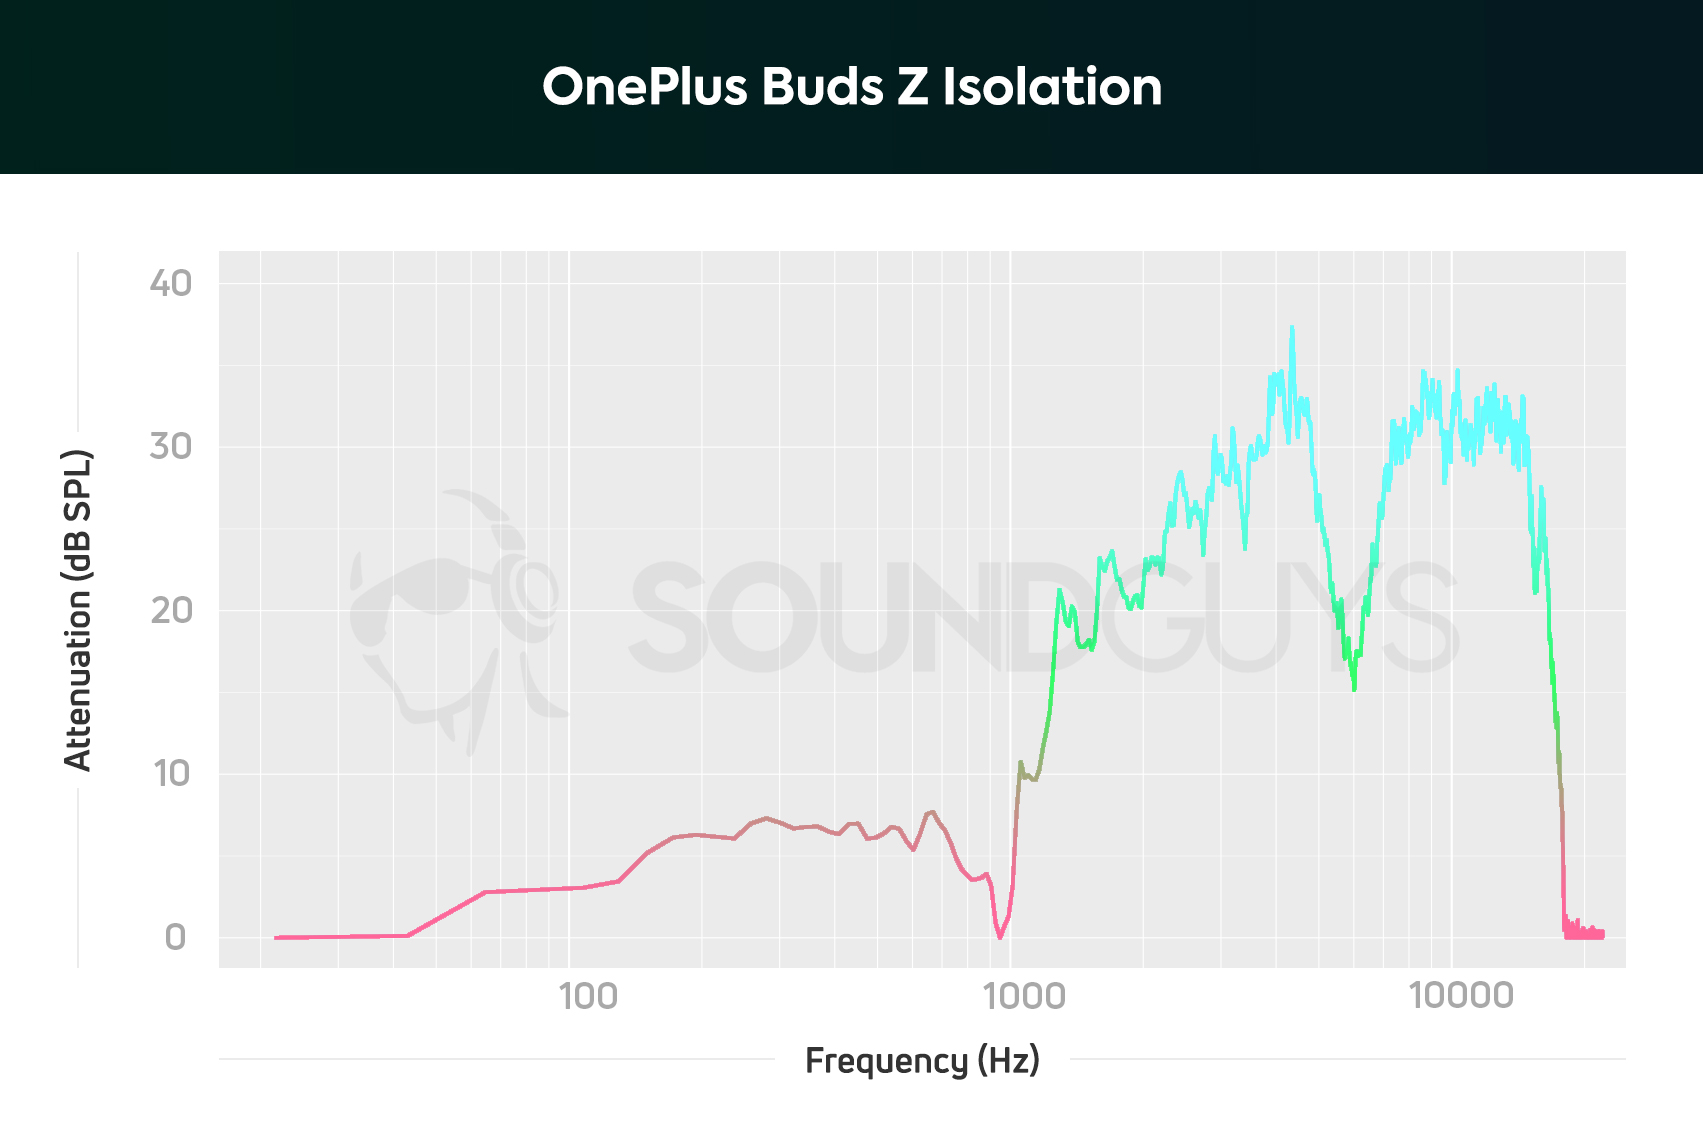 The OnePlus Buds Z isolation performance chart, which illustrates how well the earbuds block out high-frequency sounds.